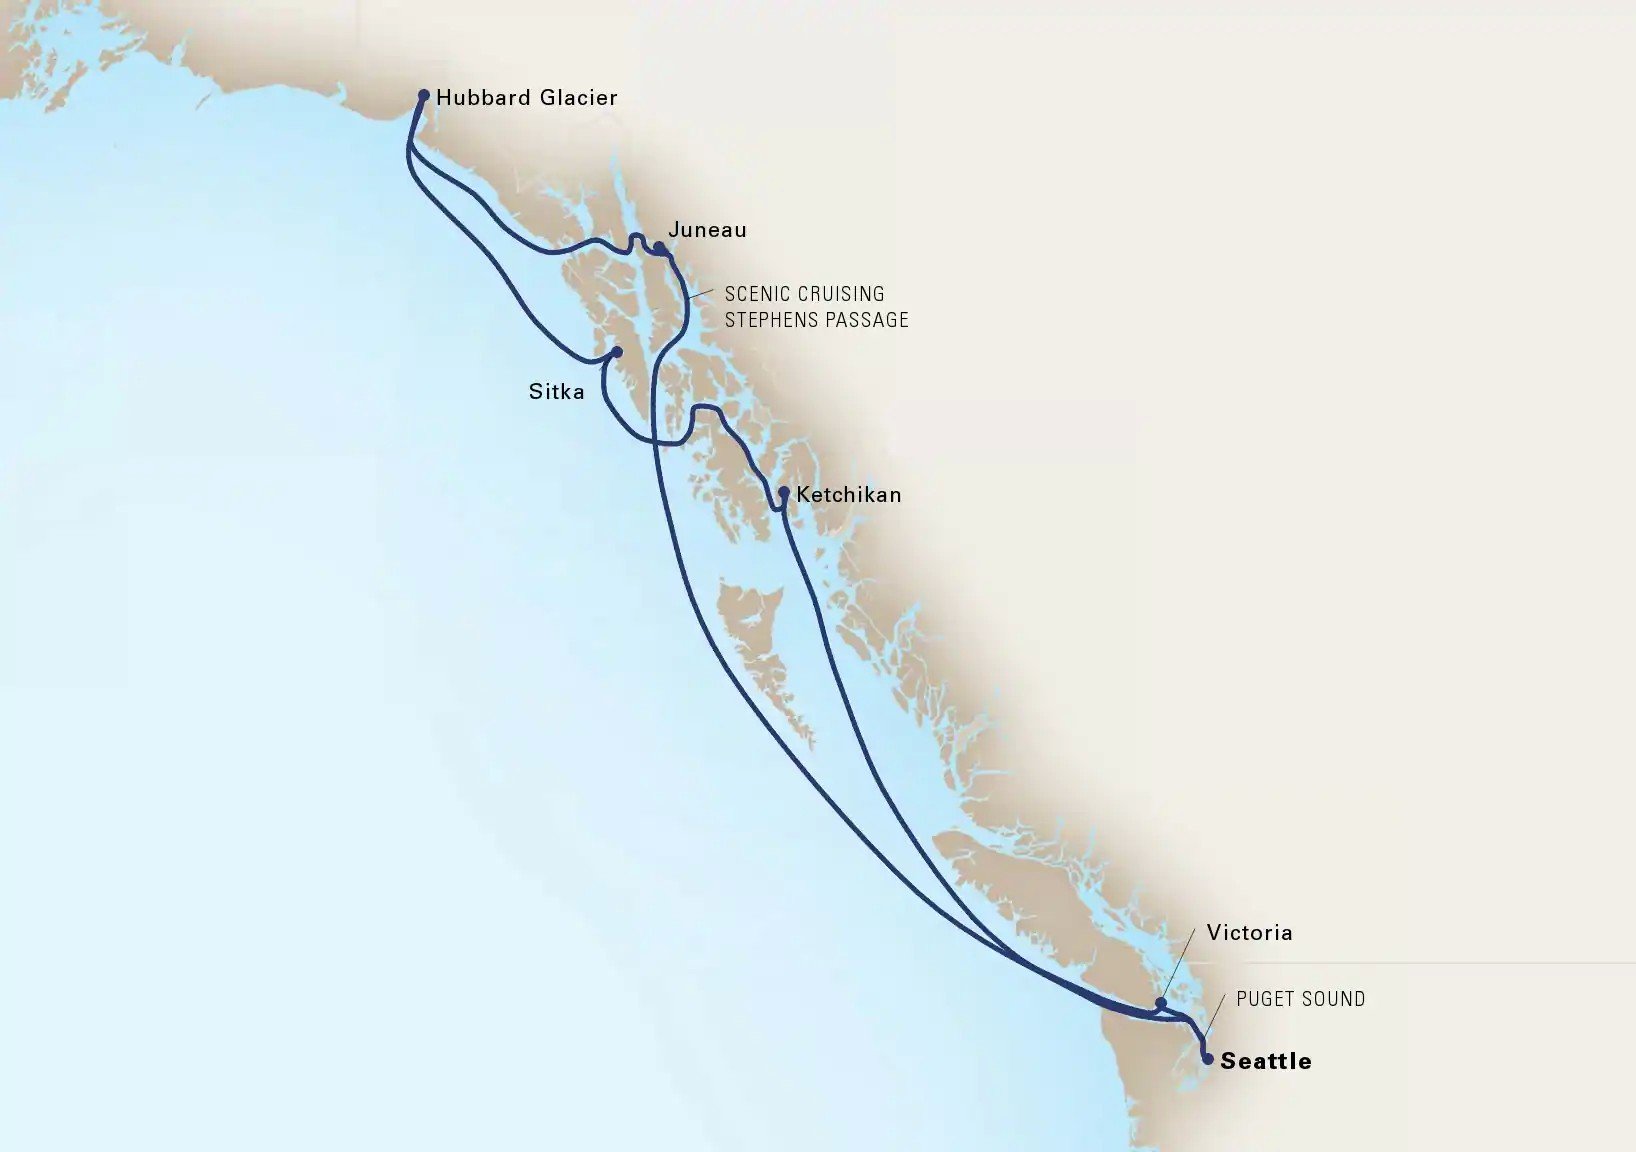 alaska cruise from seattle port map